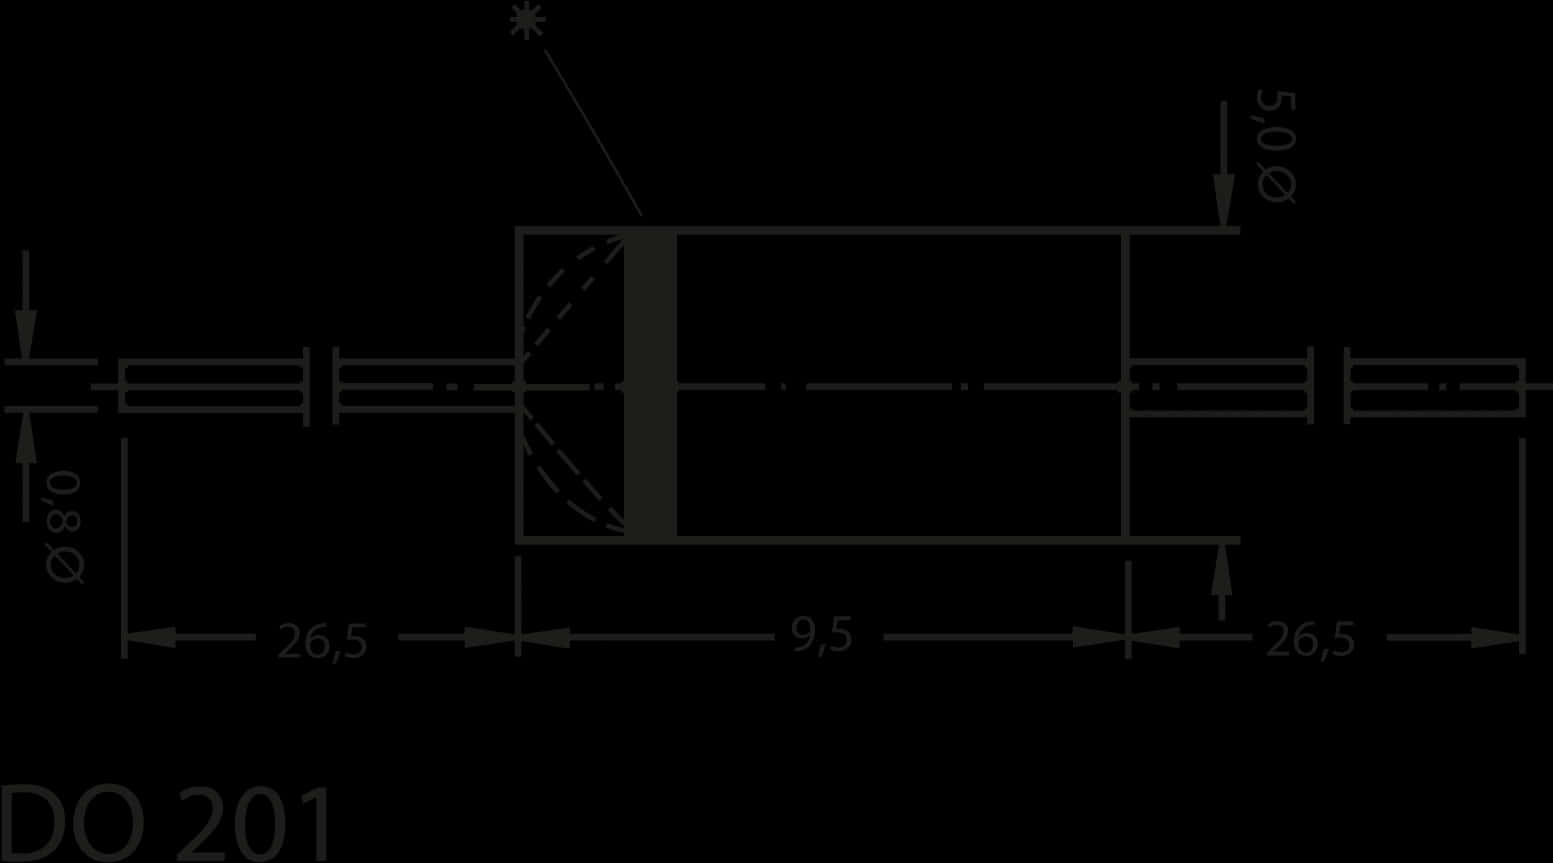 Technical Drawing Black Background